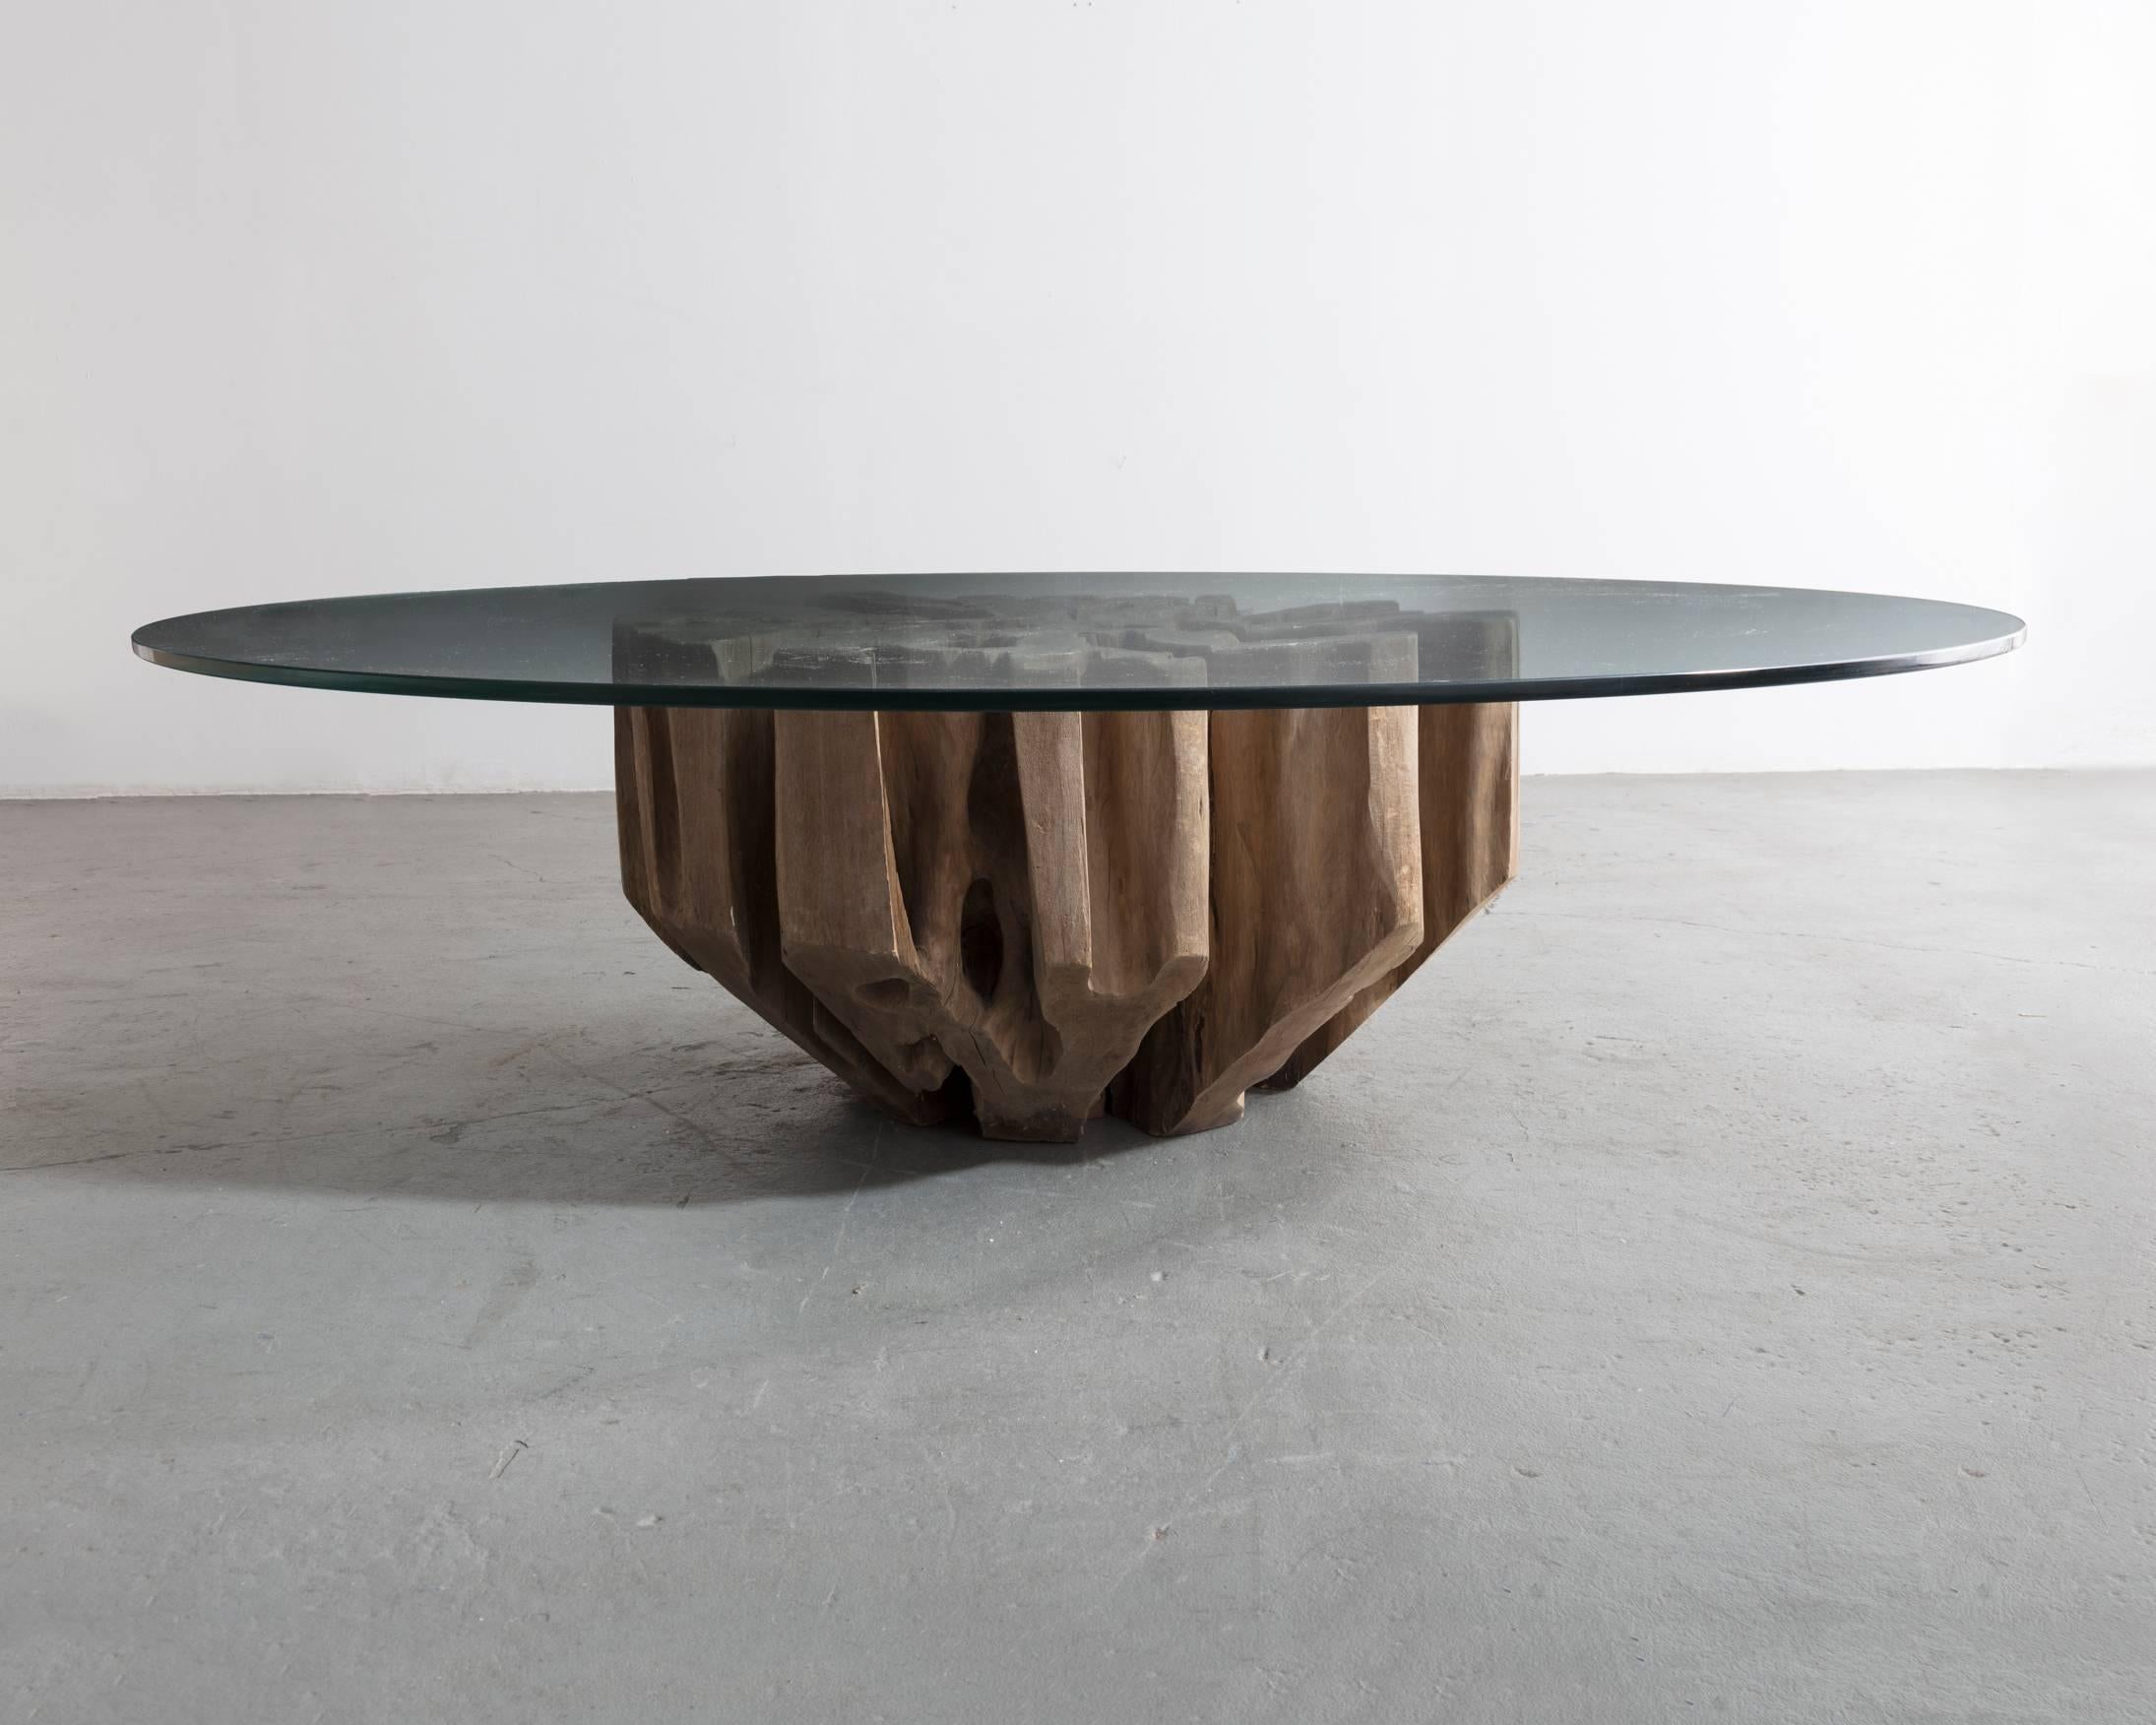 Sculptural coffee table base in solid wood designed by José Zanine Caldas and manufactured by his workshop, Brazil, c. 1988.